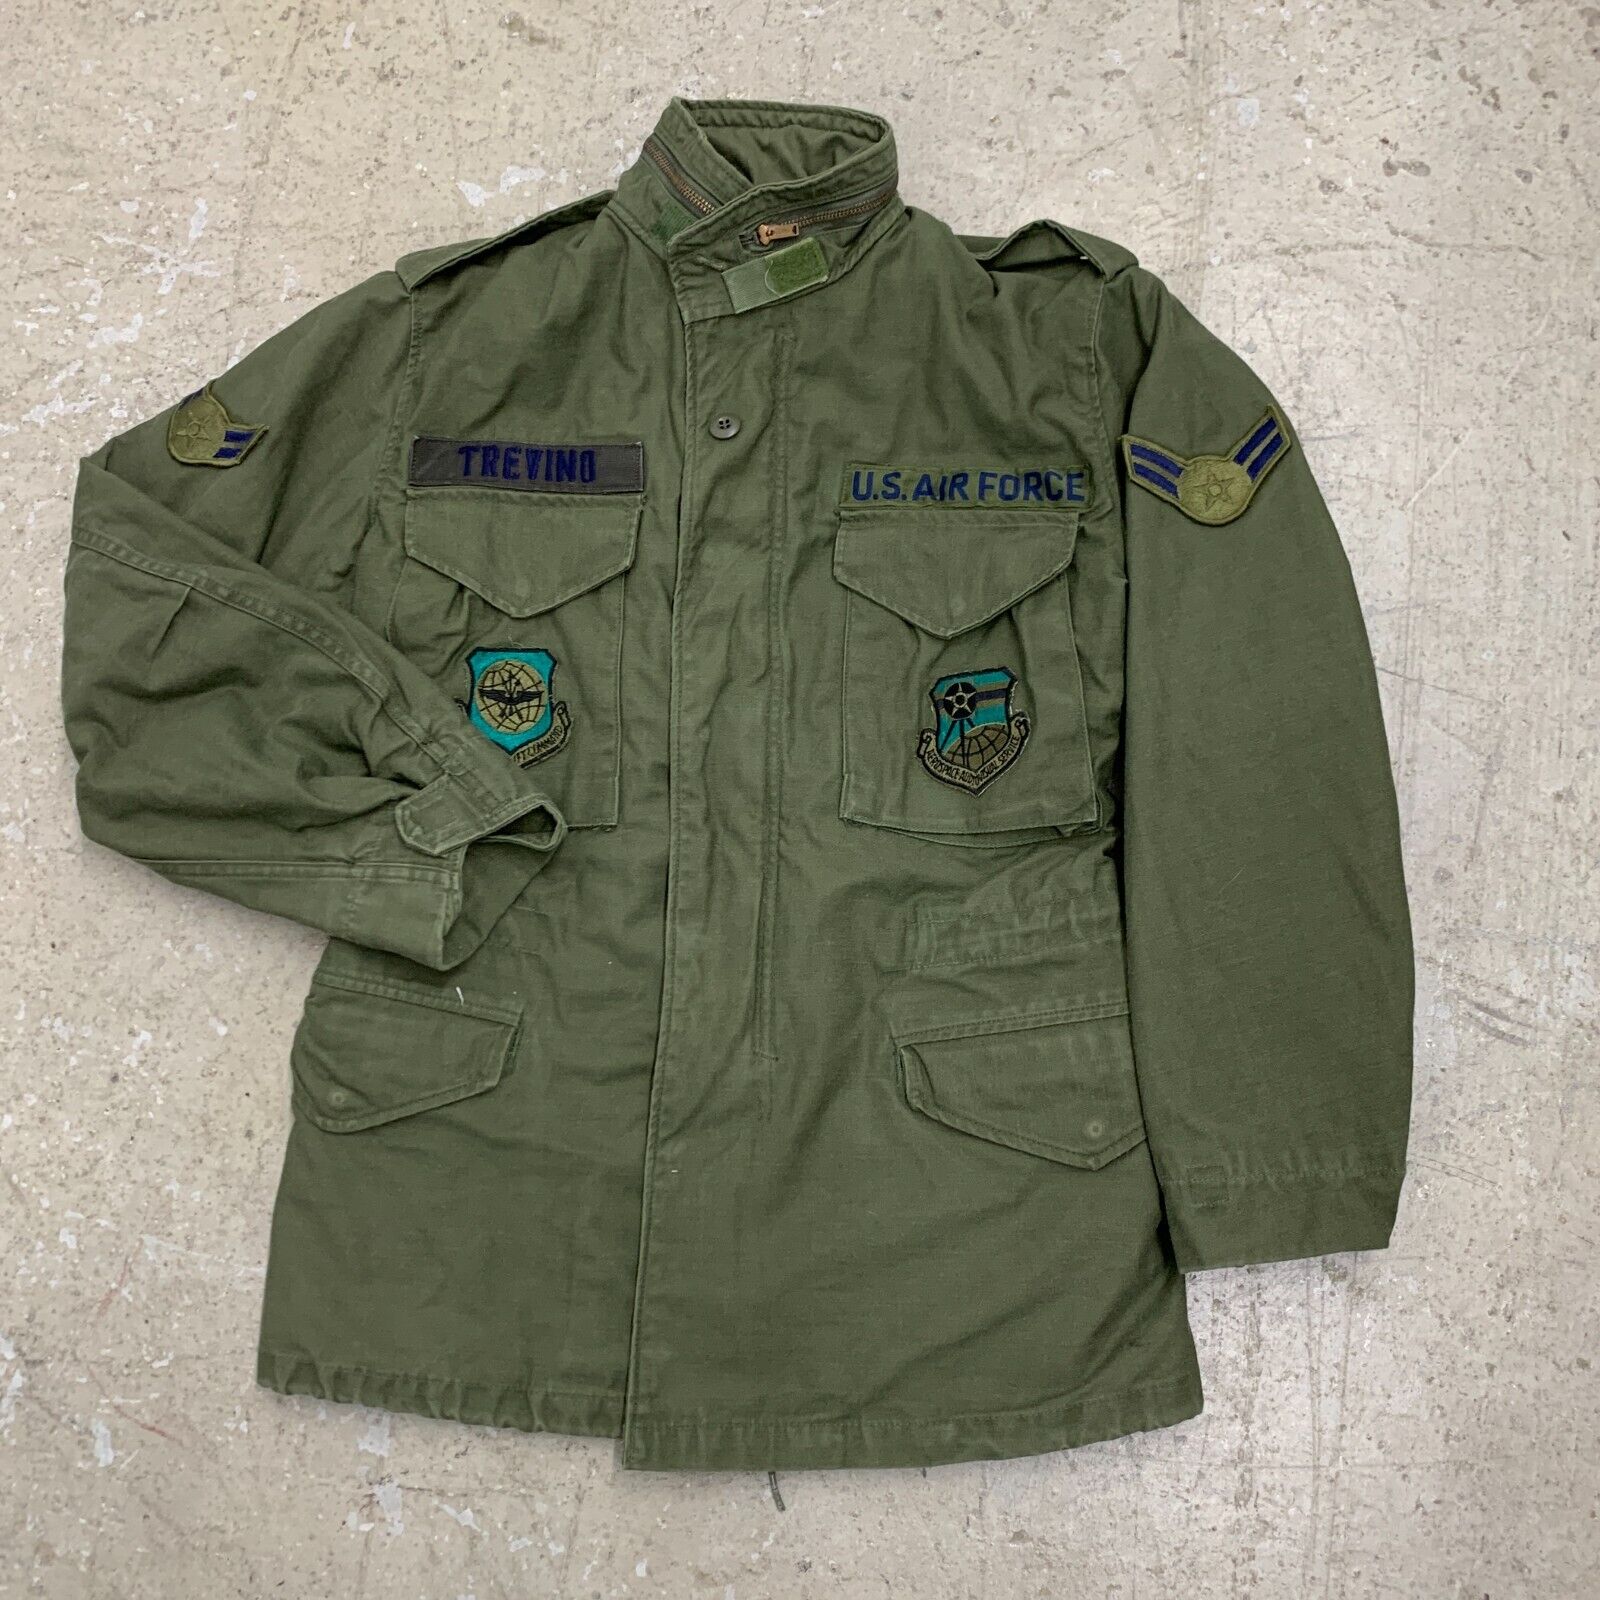 Vintage US Military Jacket Mens XS M65 Cold Weather Field OG 107 Coat Patches